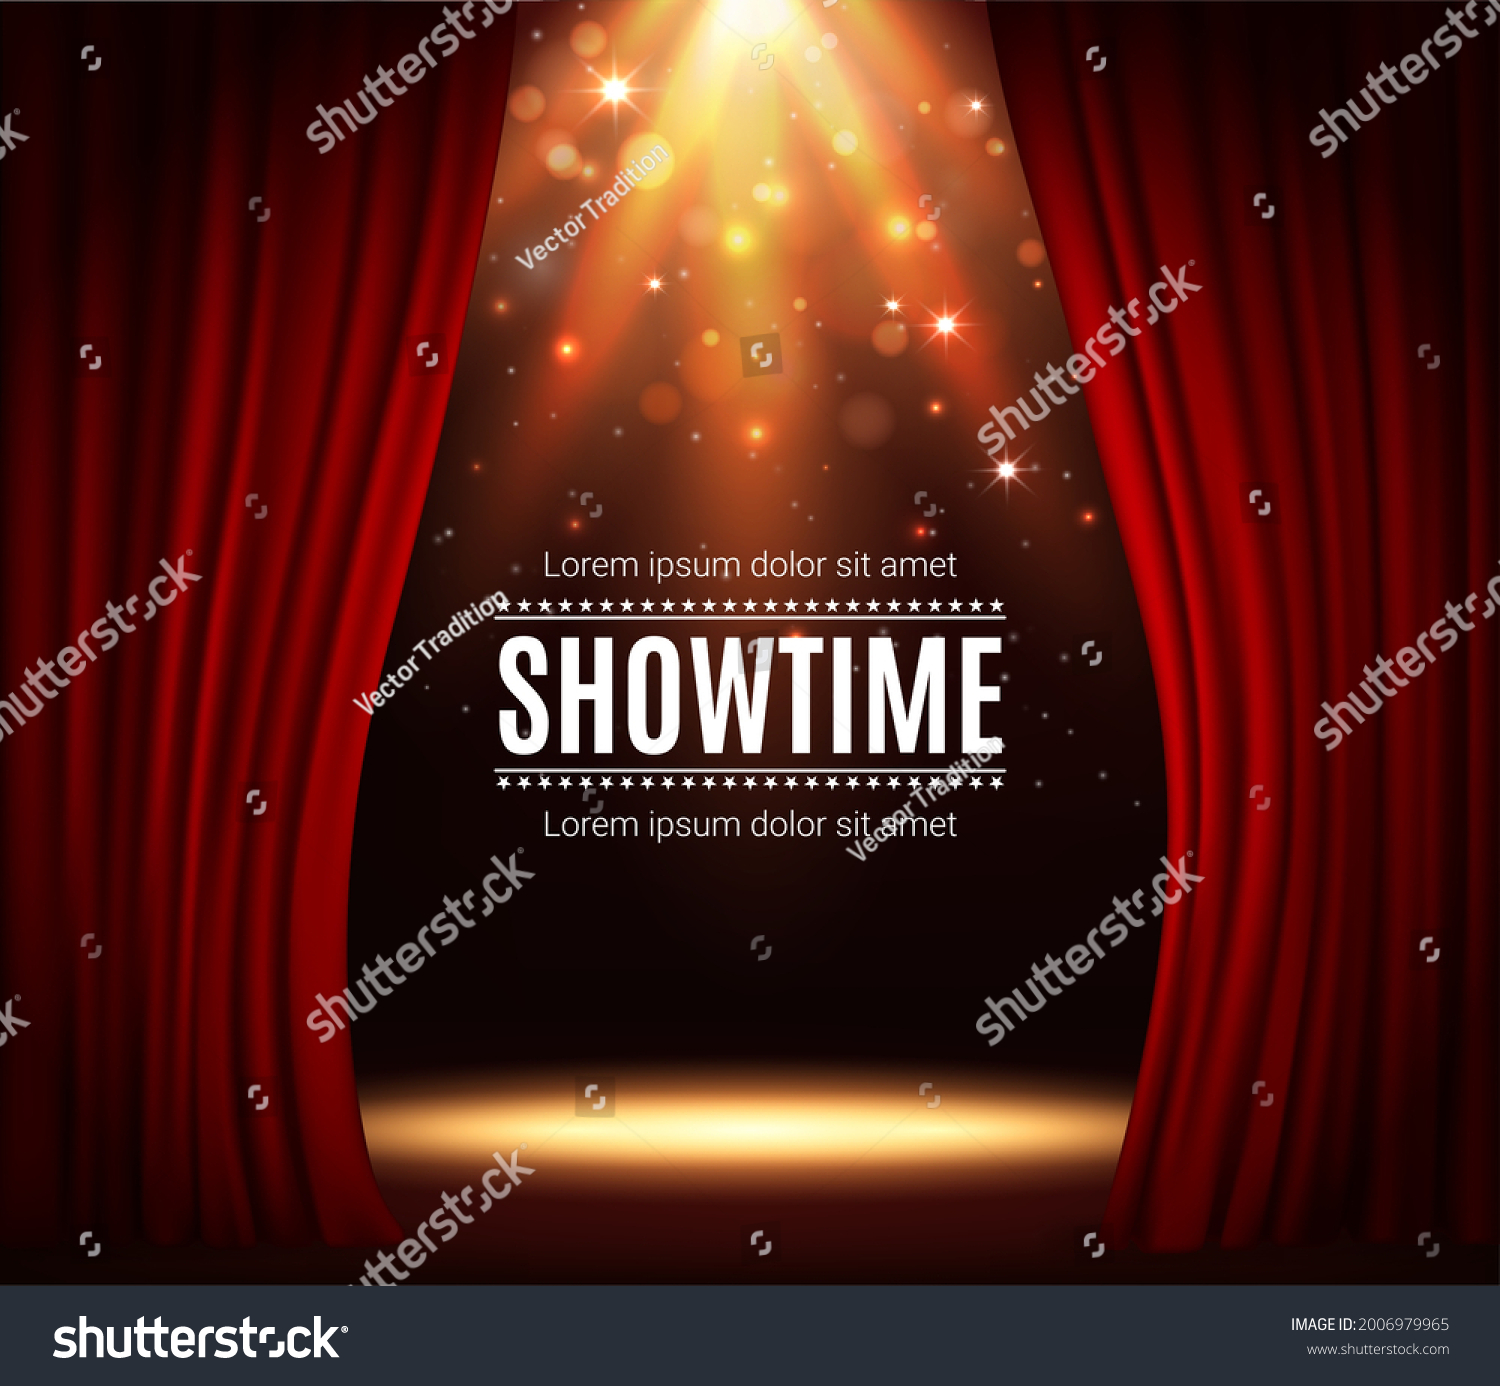 SVG of Stage with red curtains, theater scene vector background with spotlight illumination and sparkles. Showtime poster for performance, music show or concert with realistic 3d red curtains and light glow svg